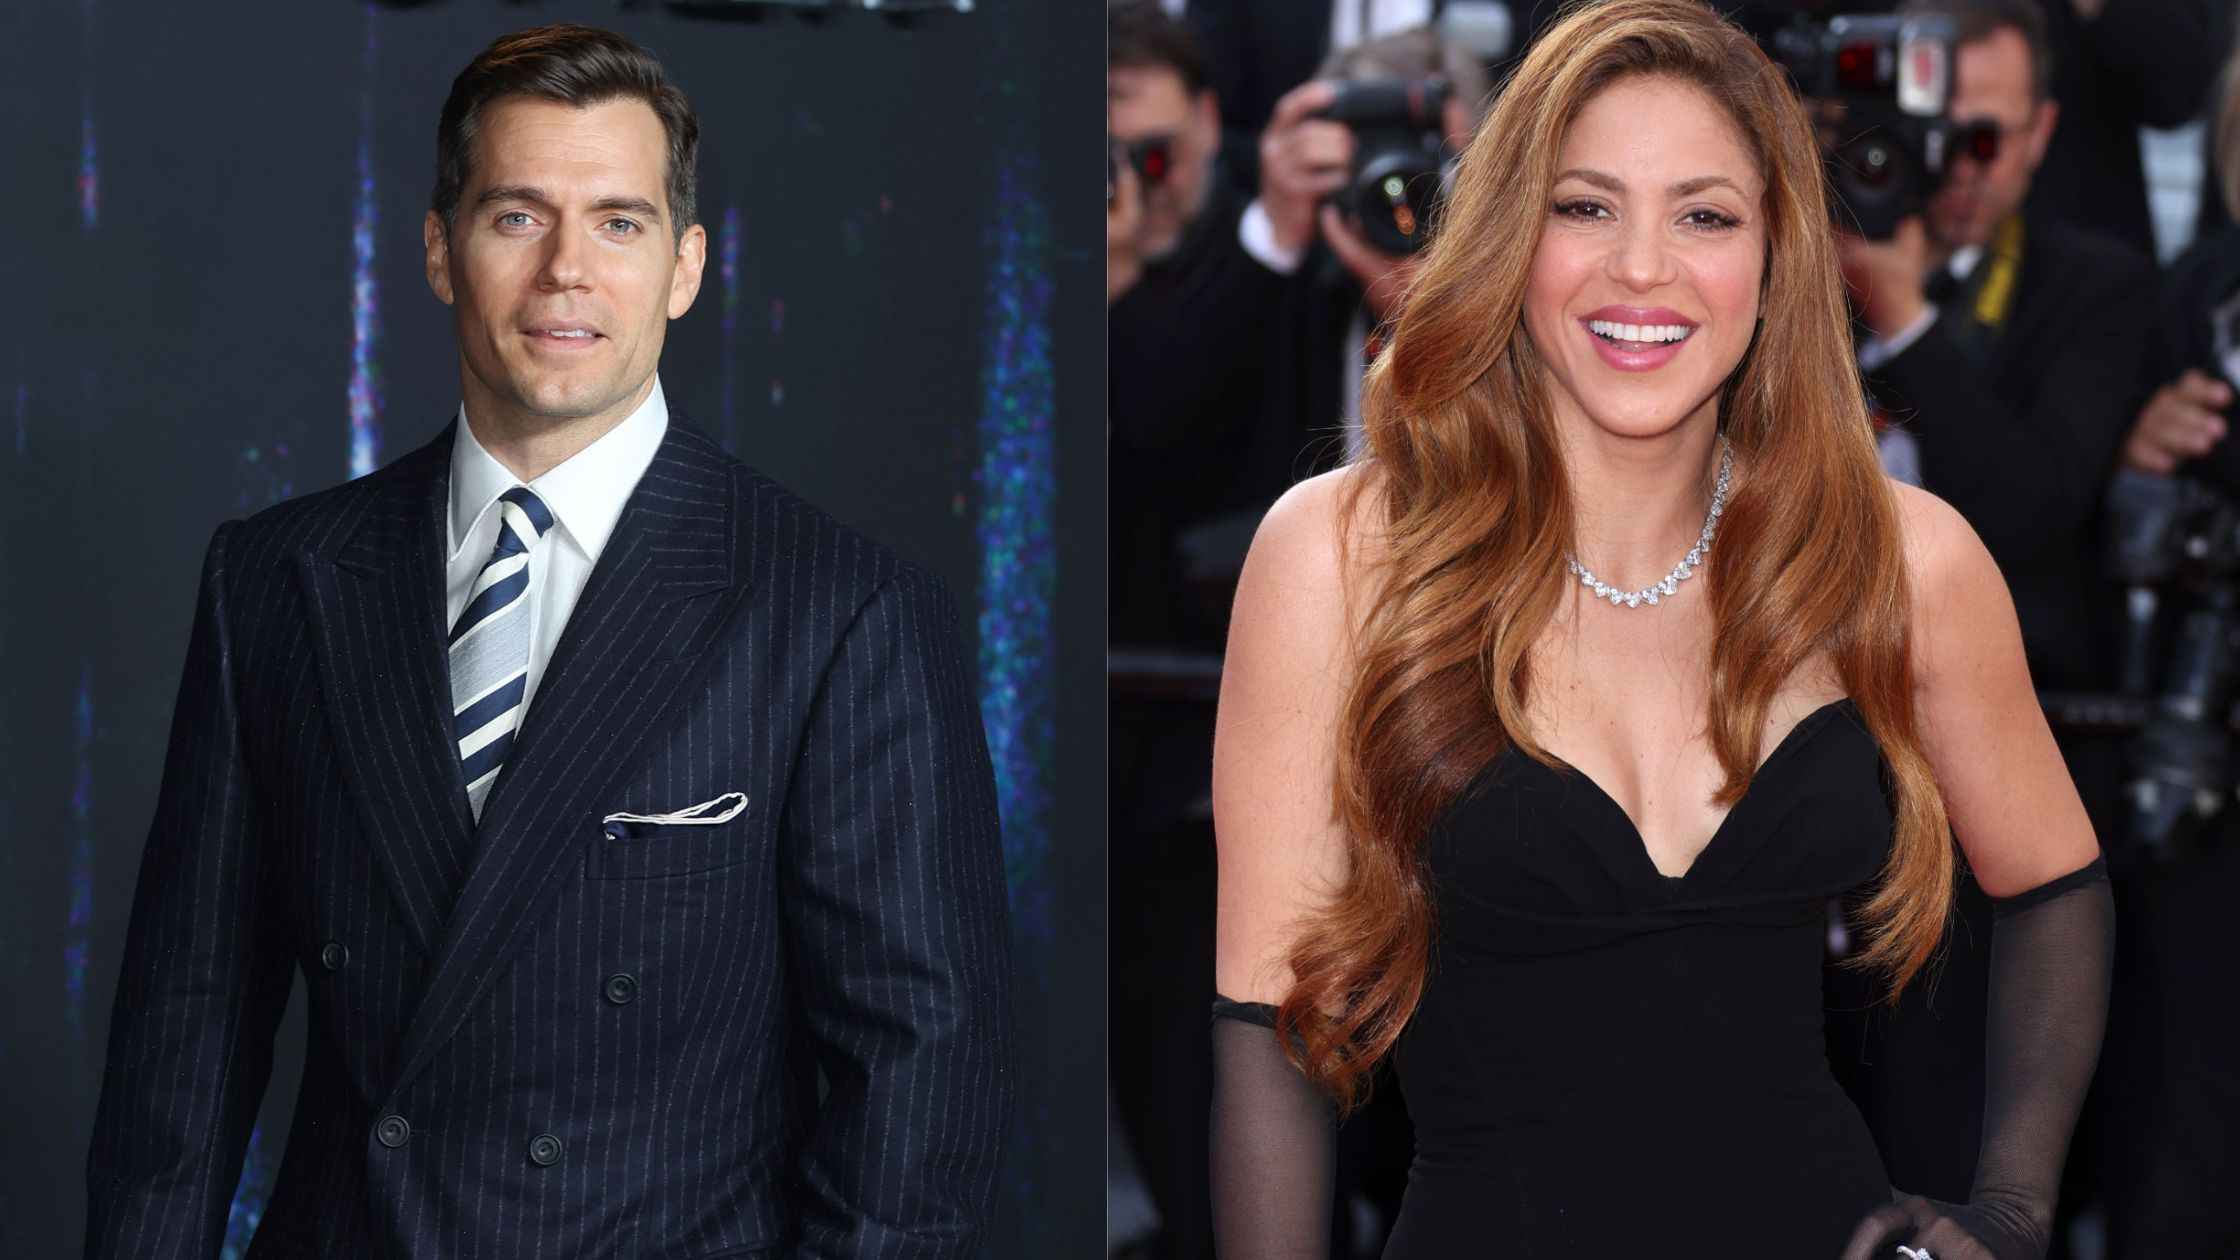 Shakira Follows Henry Cavill And Chris Evans On Instagram After Breaking Up With Gerard Pique